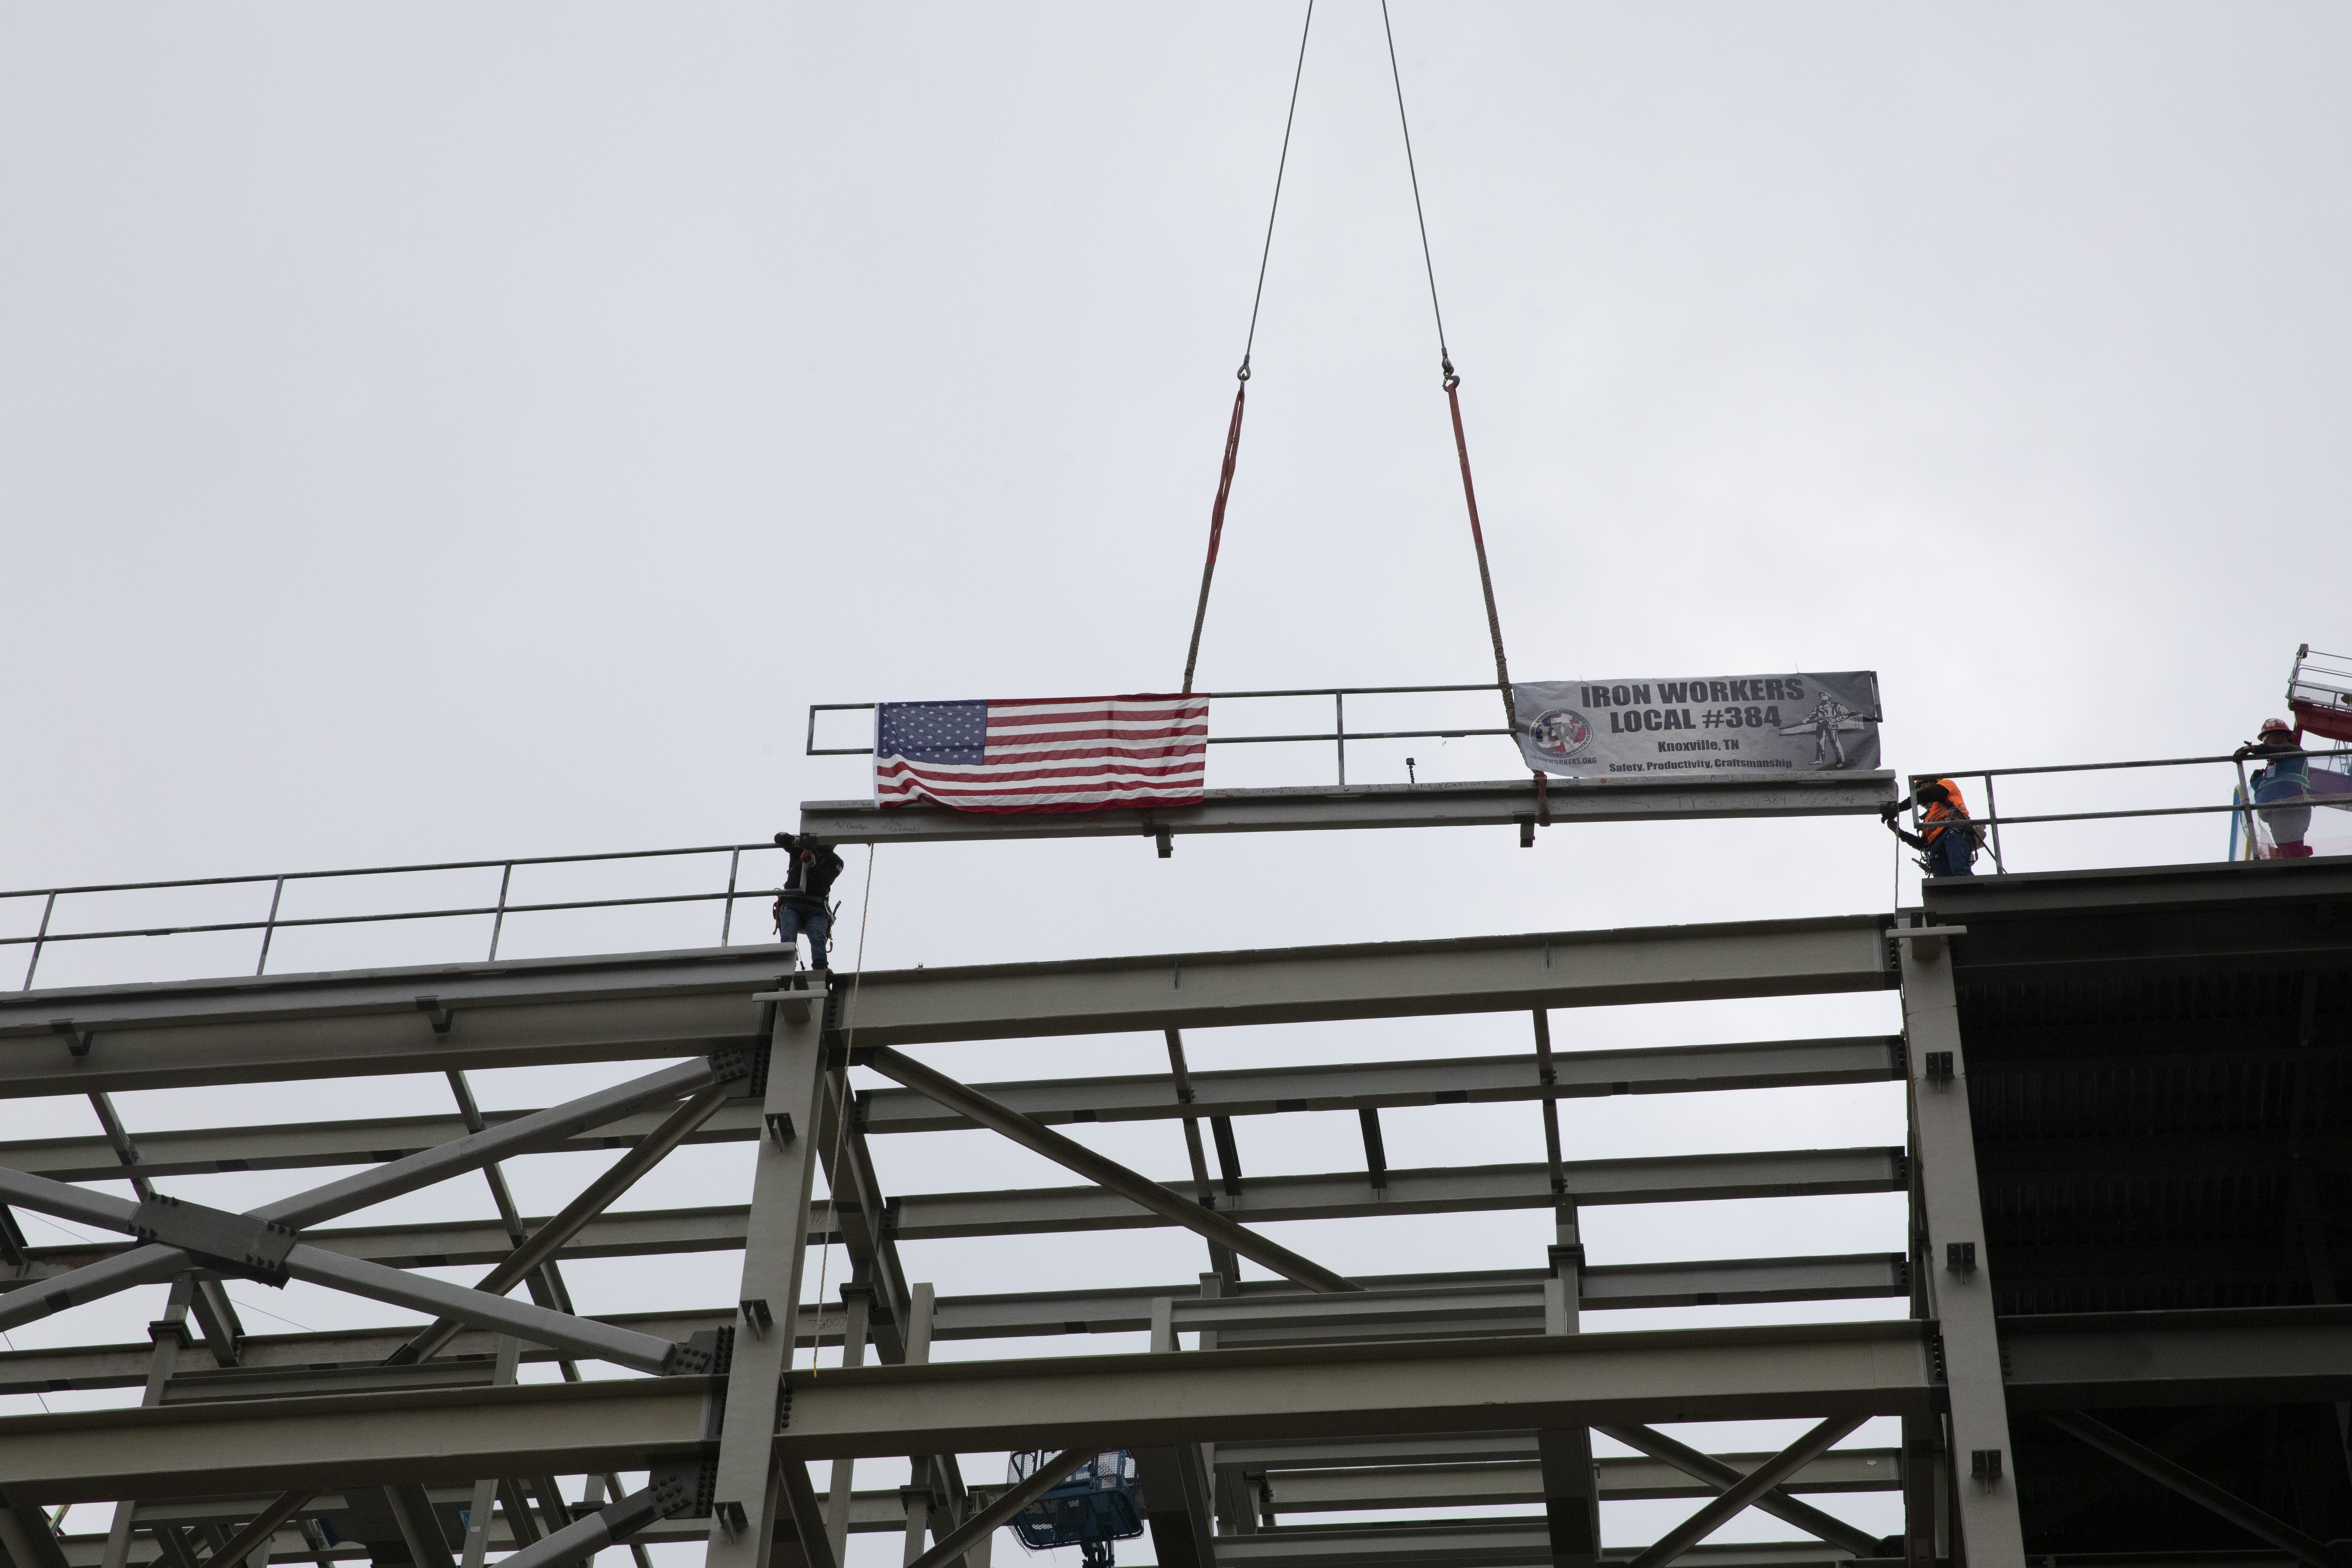 UPF placed the last piece of steel on the Salvage and Accountability with a topping out ceremony on October 26, 2020